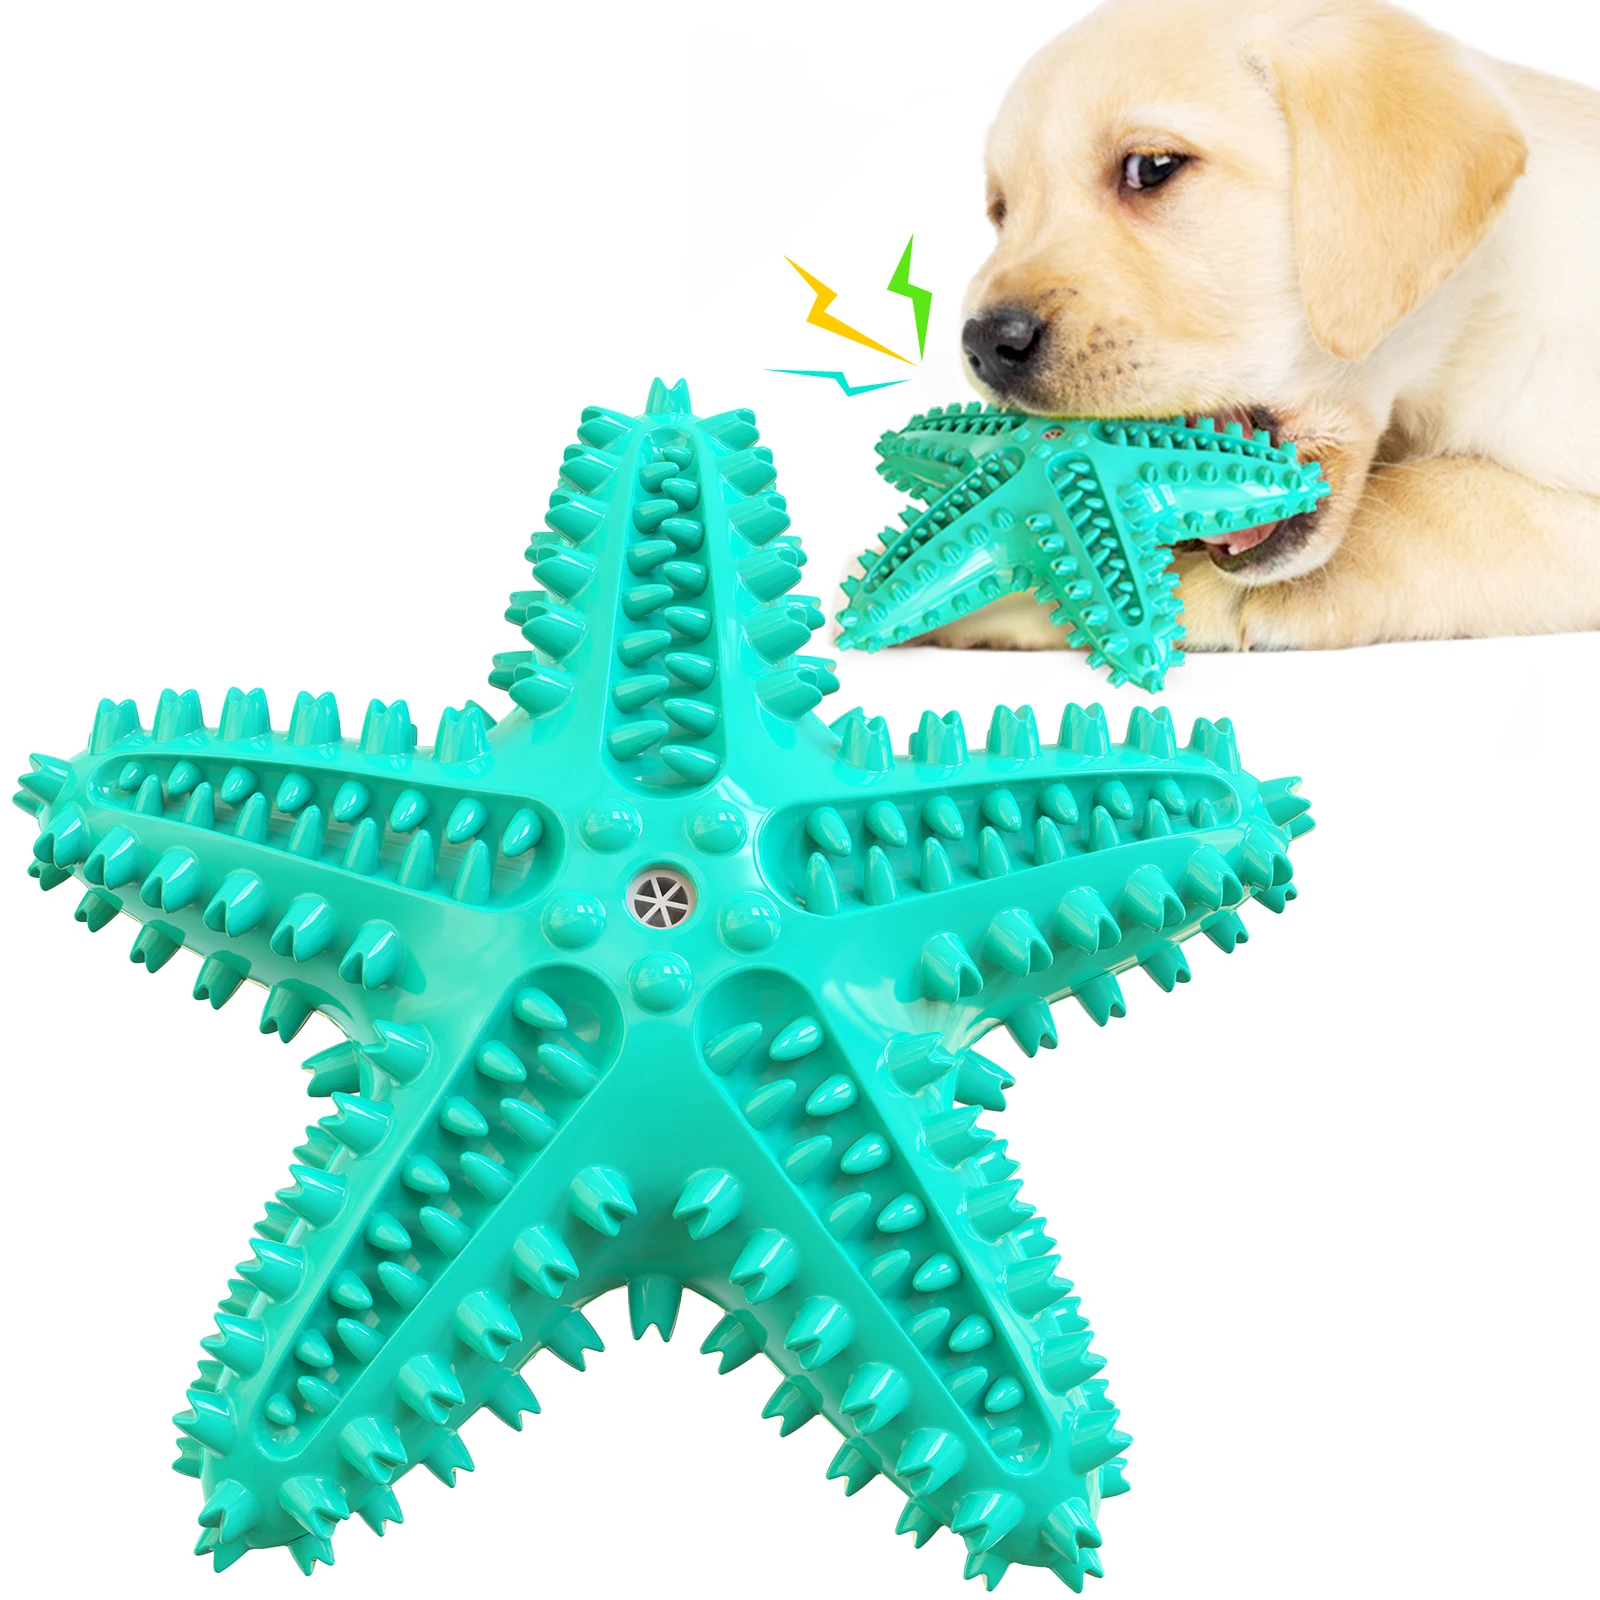 

Dreamzoo amazon top seller wholesale custom funny squeaky luxury pet toys puzzle interactive pet chew rope dog toys, 3 colors